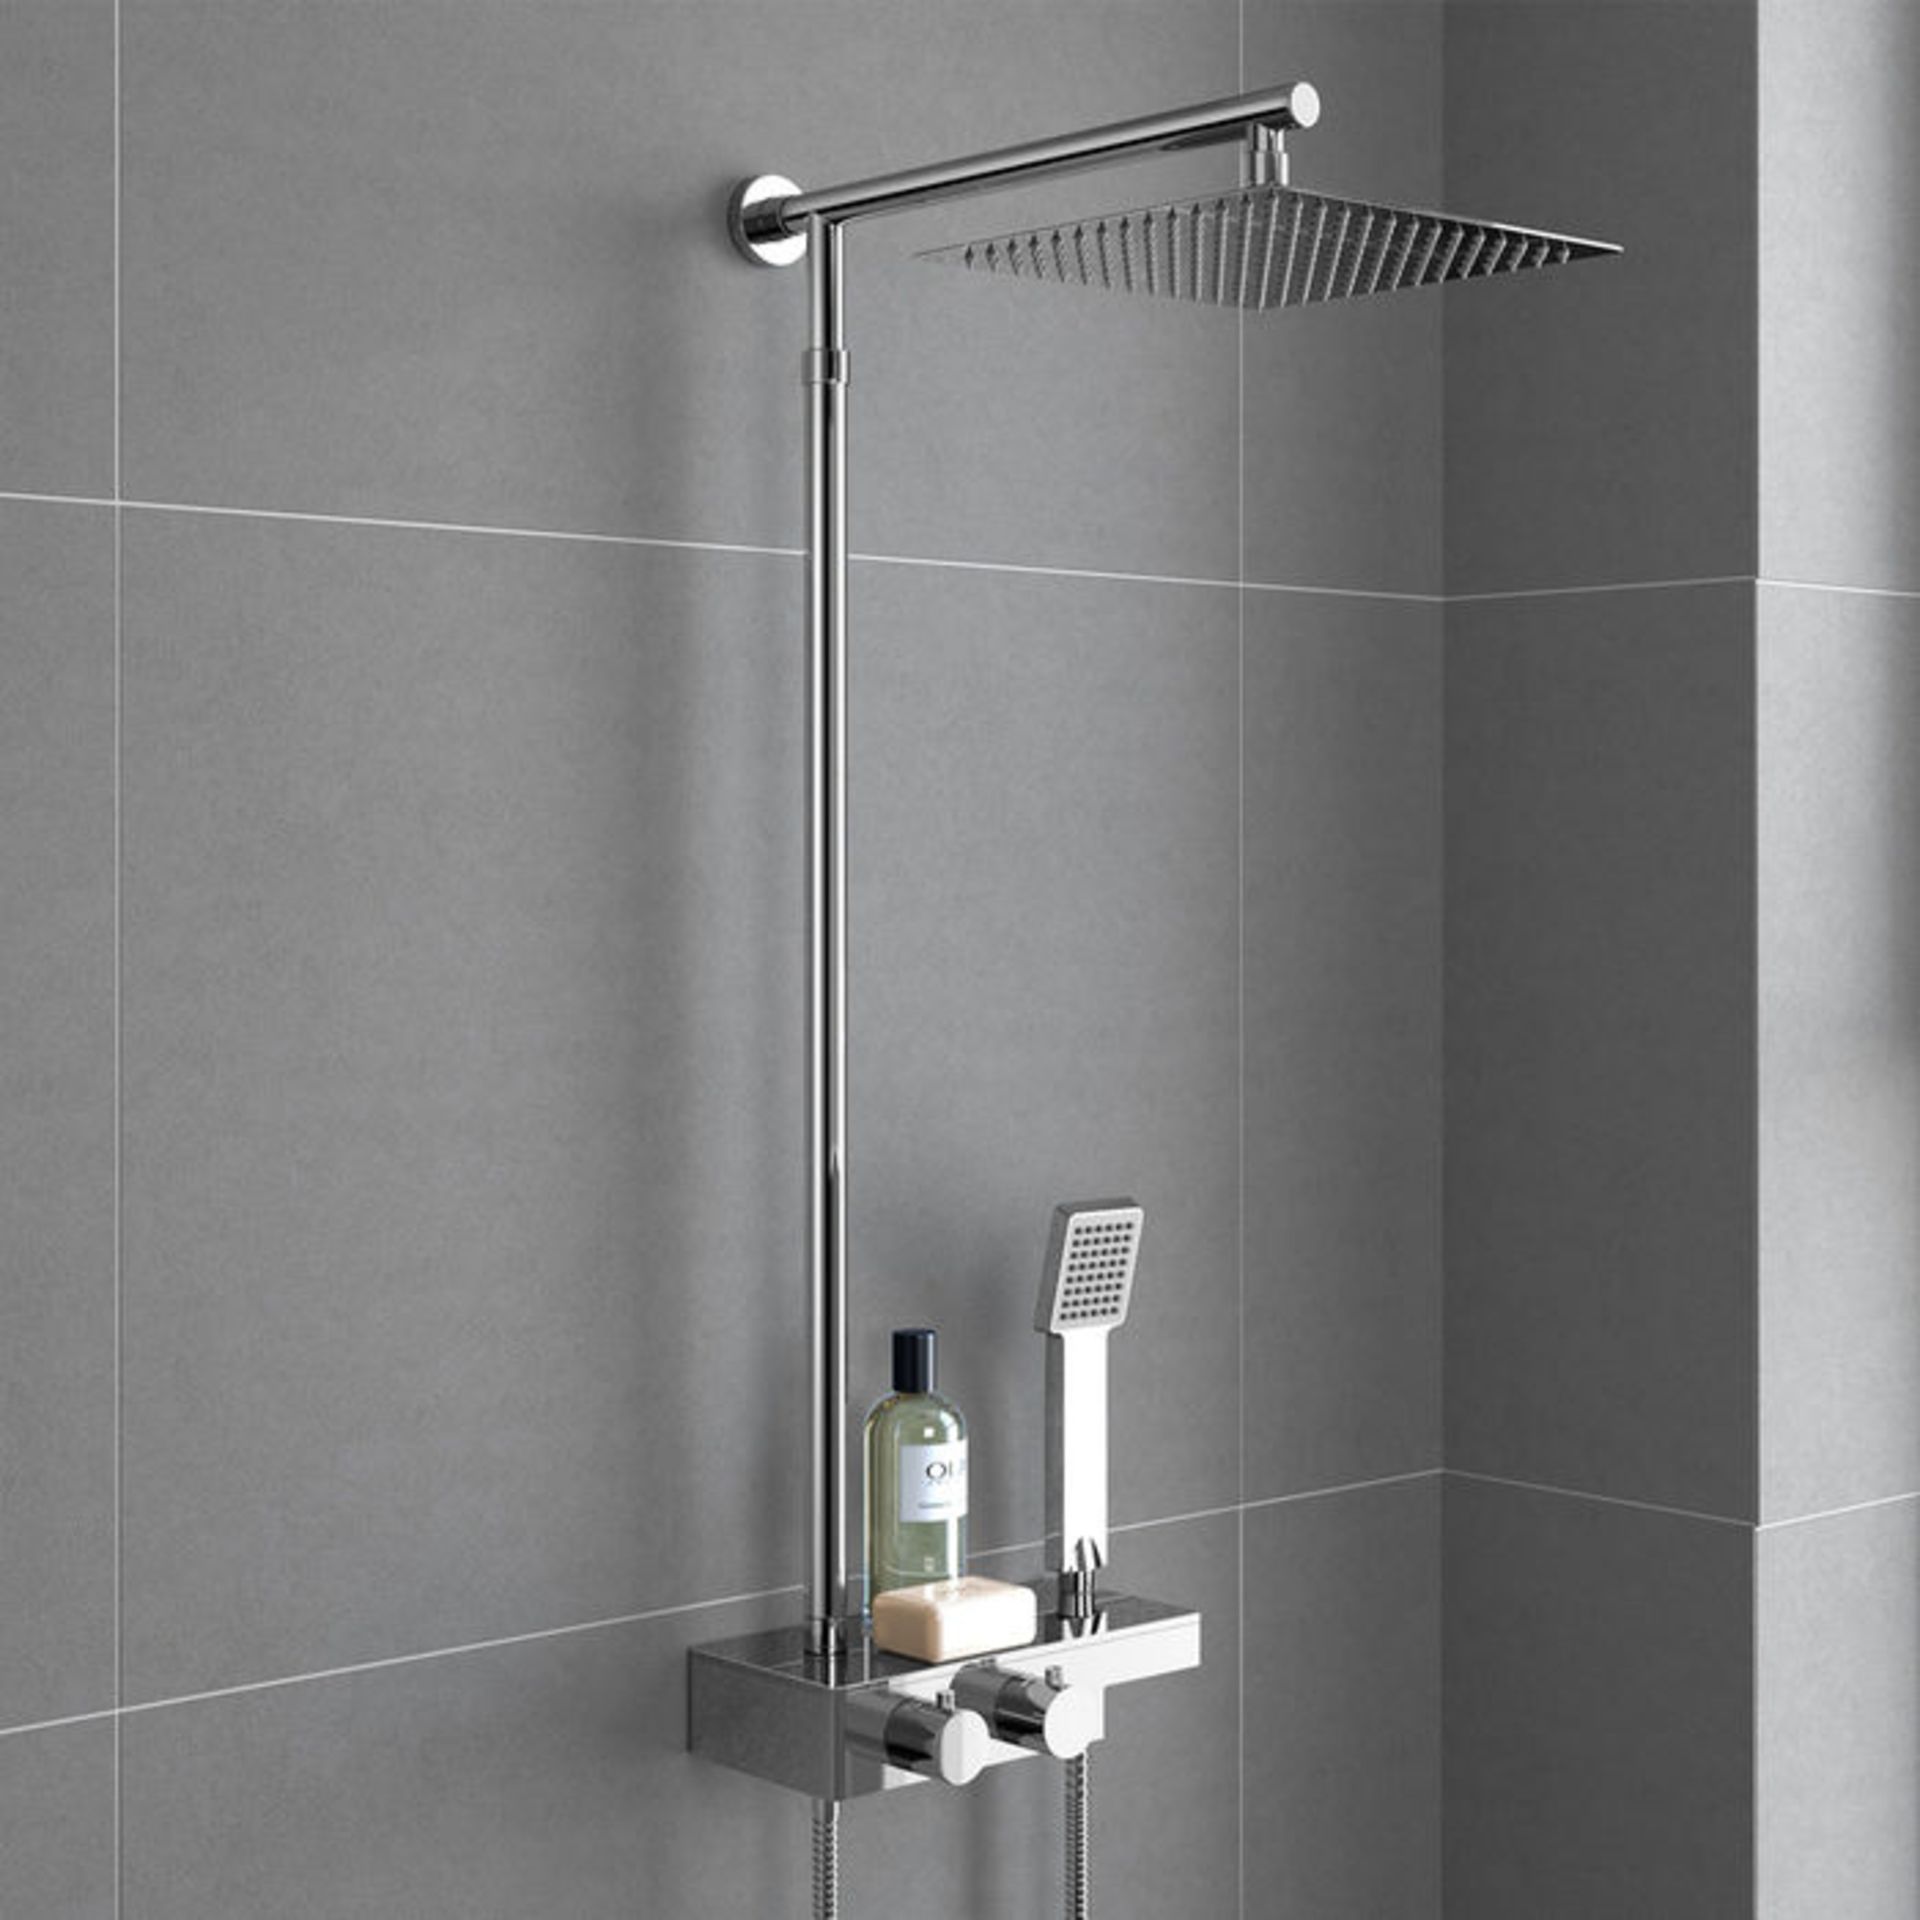 (PT63) Square Exposed Thermostatic Shower Shelf, Kit & Large Head. RRP £349.99. Style meets function - Image 3 of 3